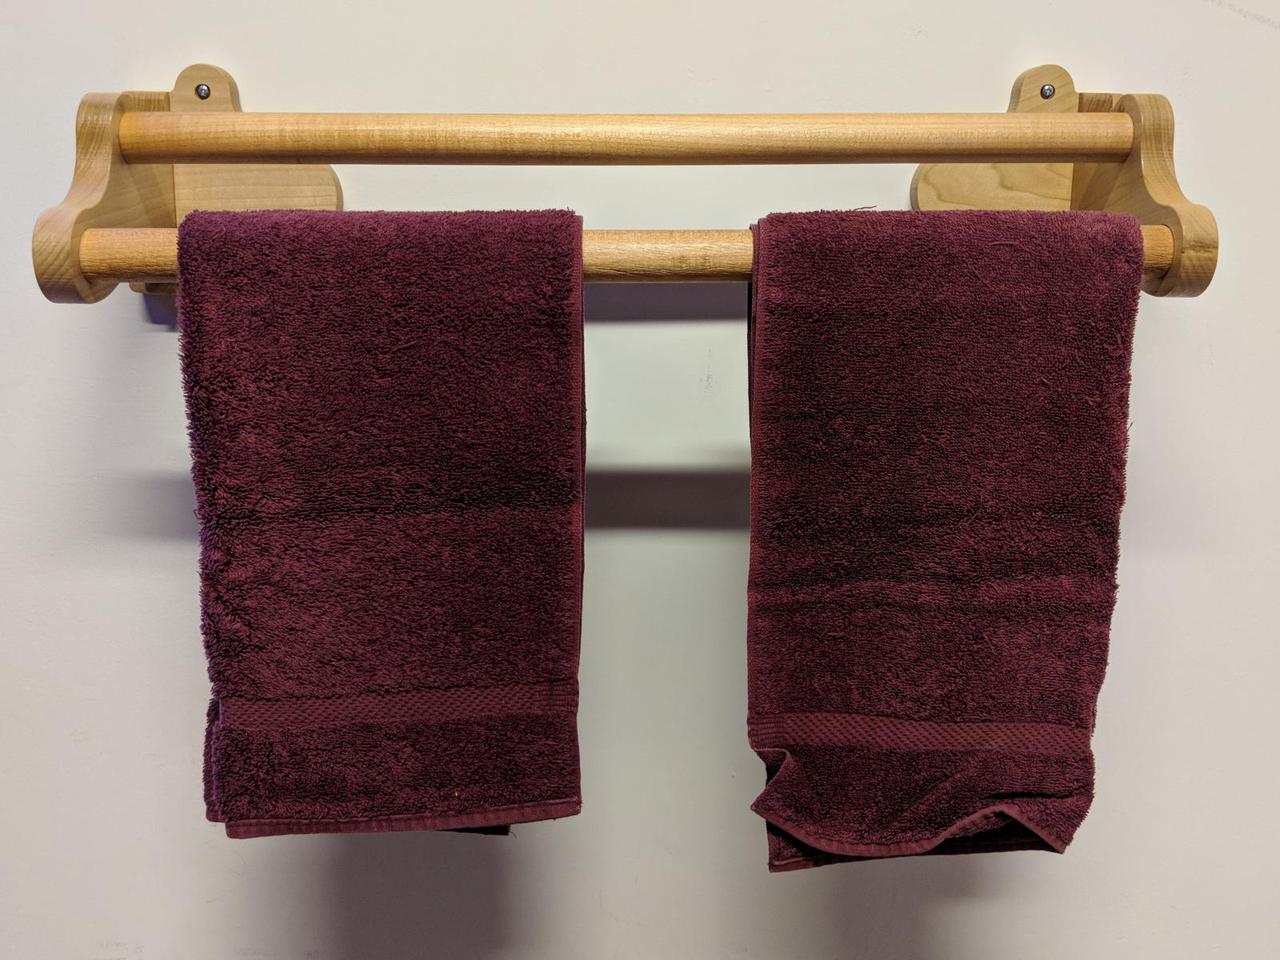 wooden towel rack mounted on the wall with two hand towels hanging on it.